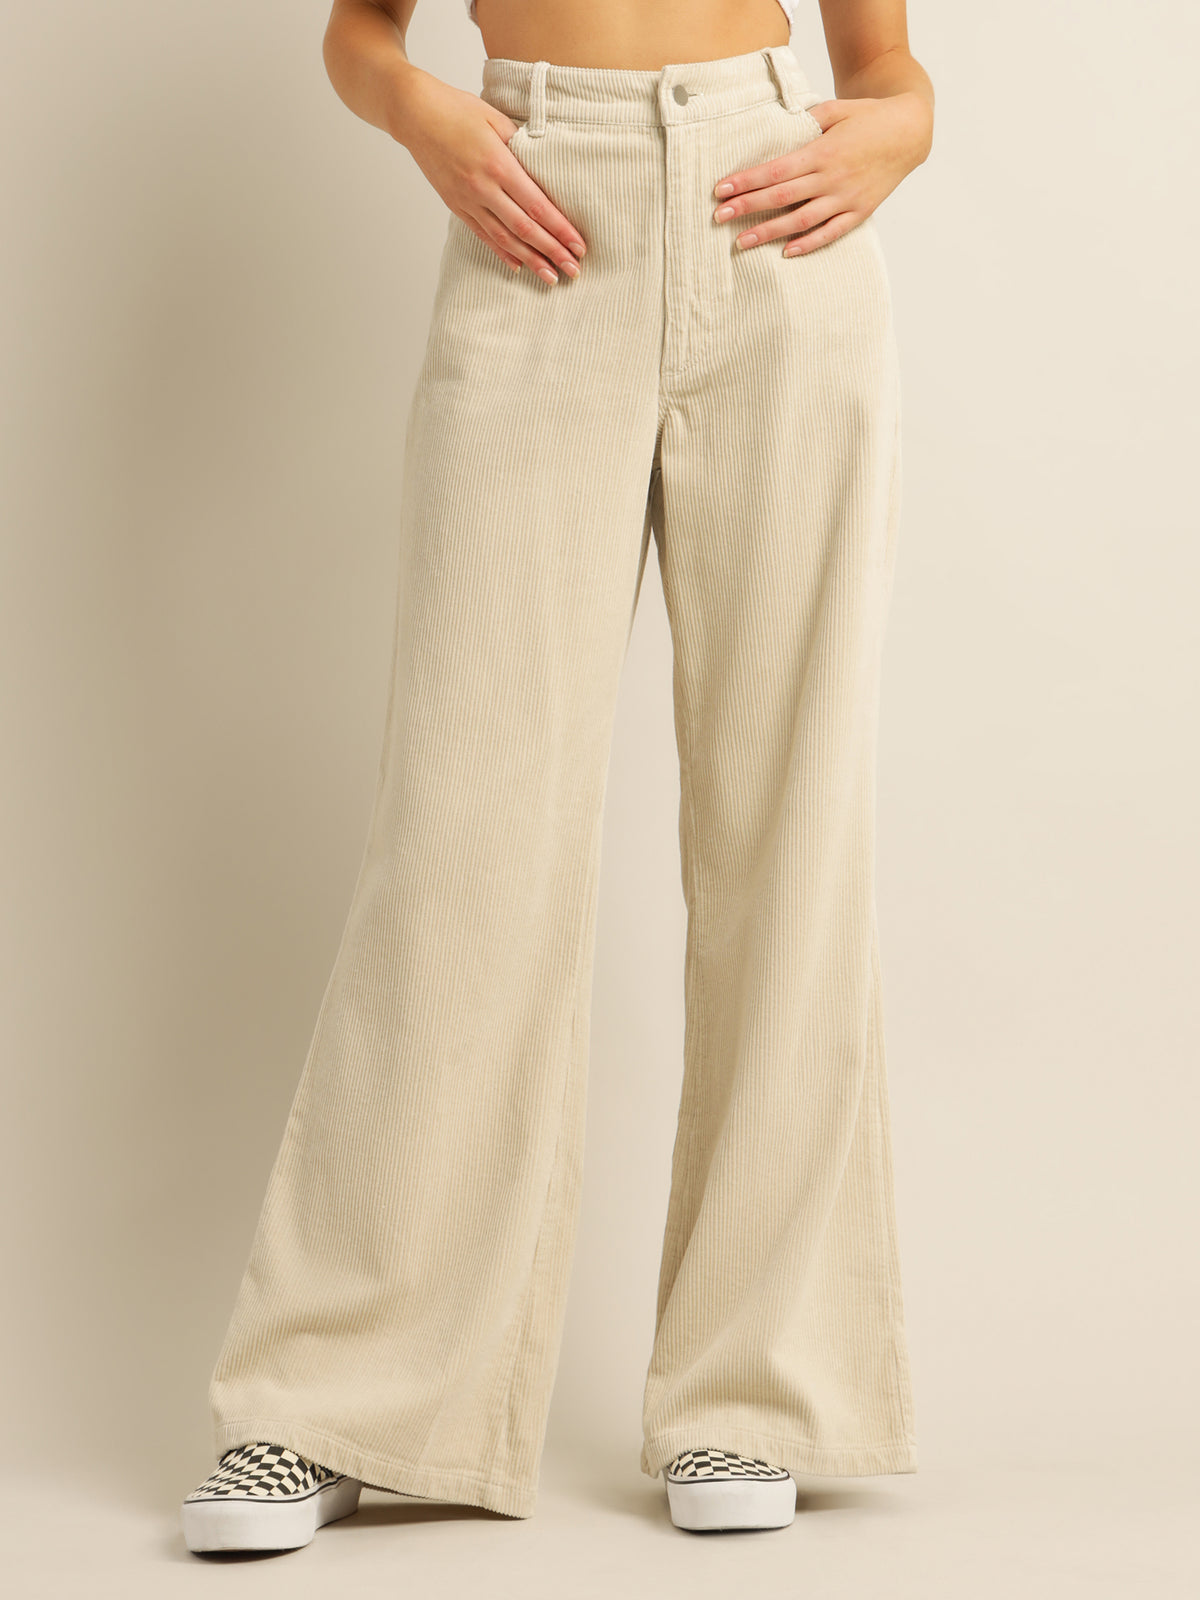 Eden Cord Pants in Off White